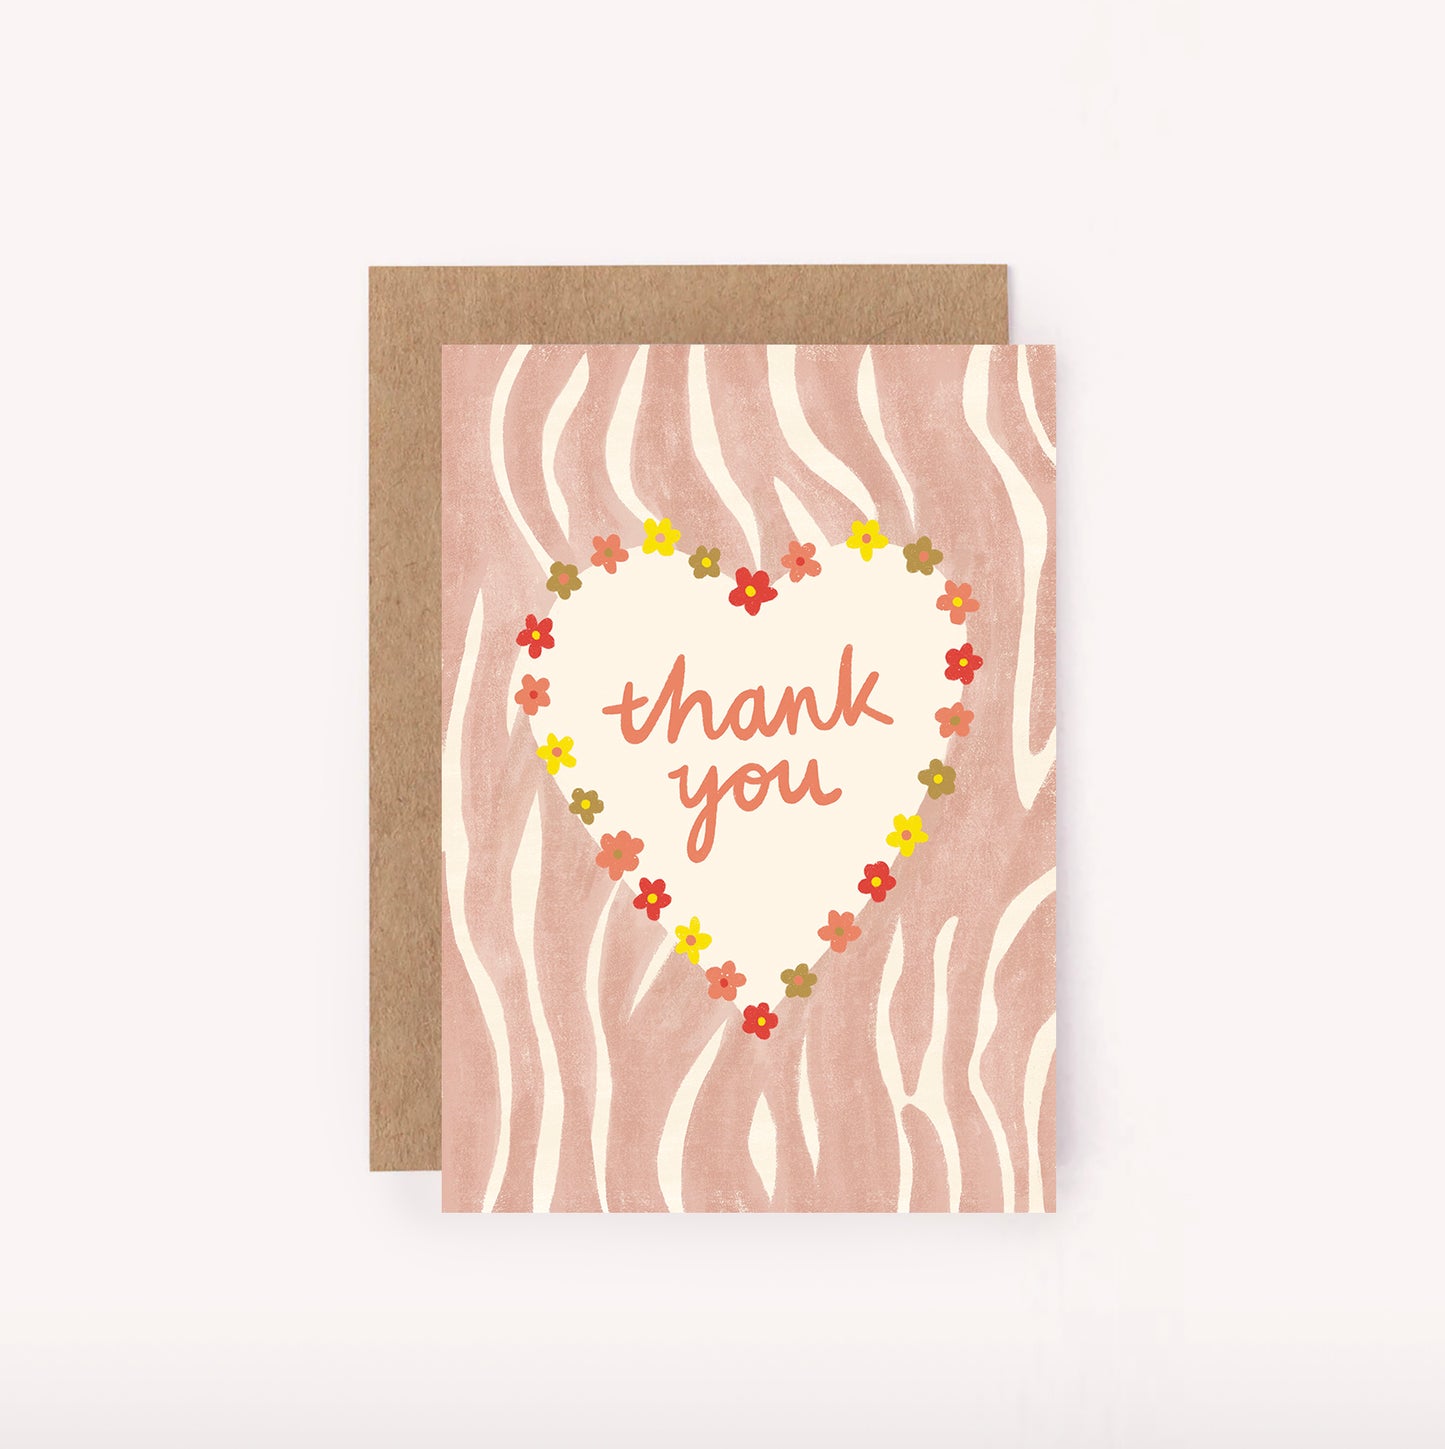 Illustrated pink zebra pattern mini card, featuring a floral outlined heart with hand-lettered "Thank You" inside